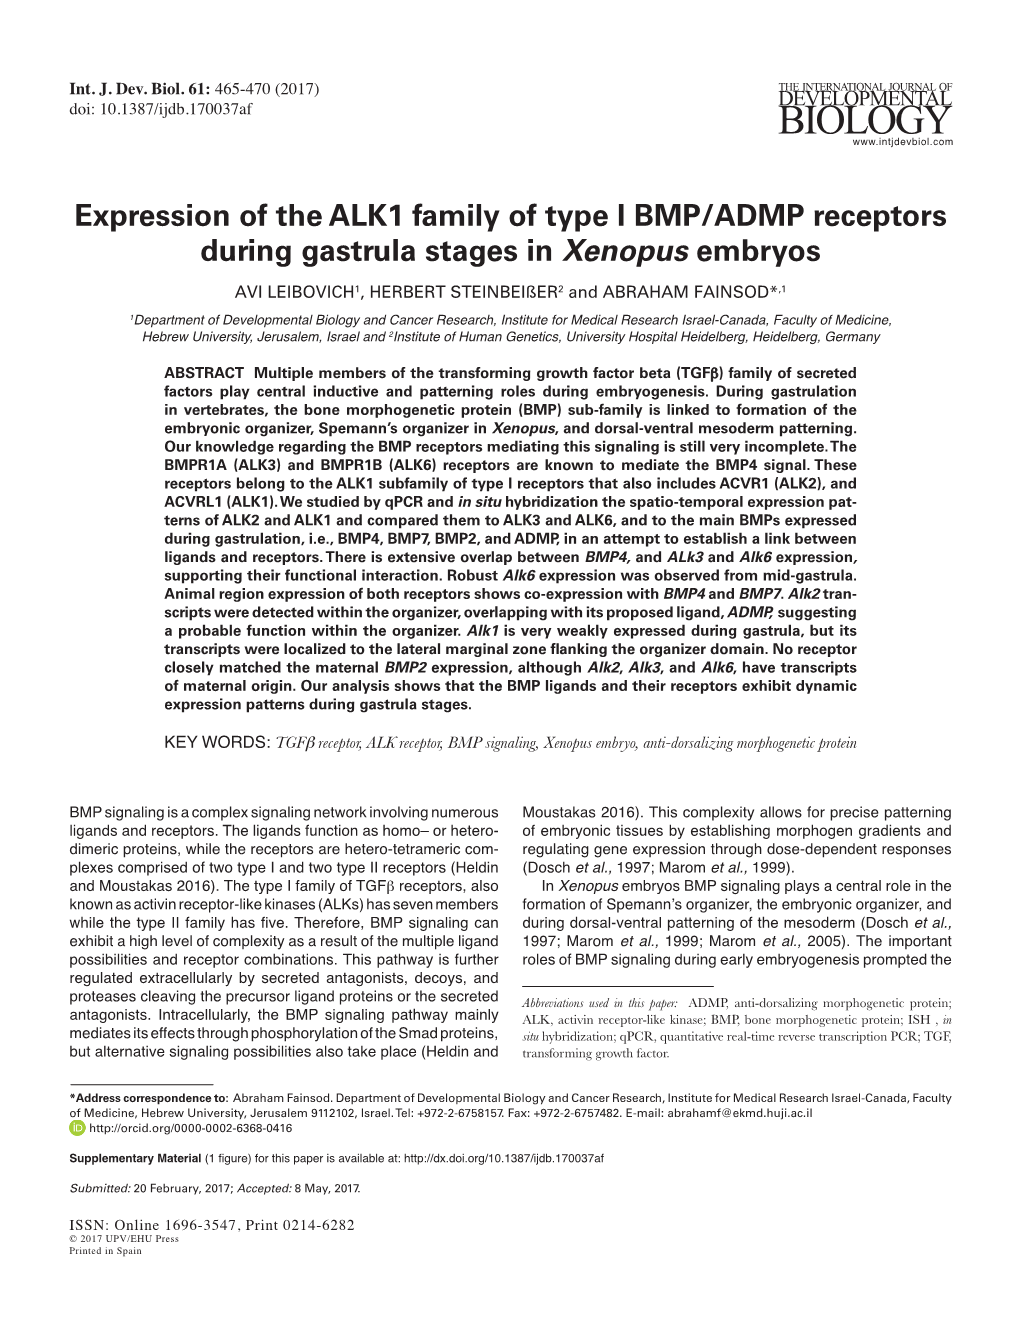 Expression of the ALK1 Family of Type I BMP/ADMP Receptors During Gastrula Stages in Xenopus Embryos AVI LEIBOVICH1, HERBERT Steinbeißer2 and ABRAHAM FAINSOD*,1